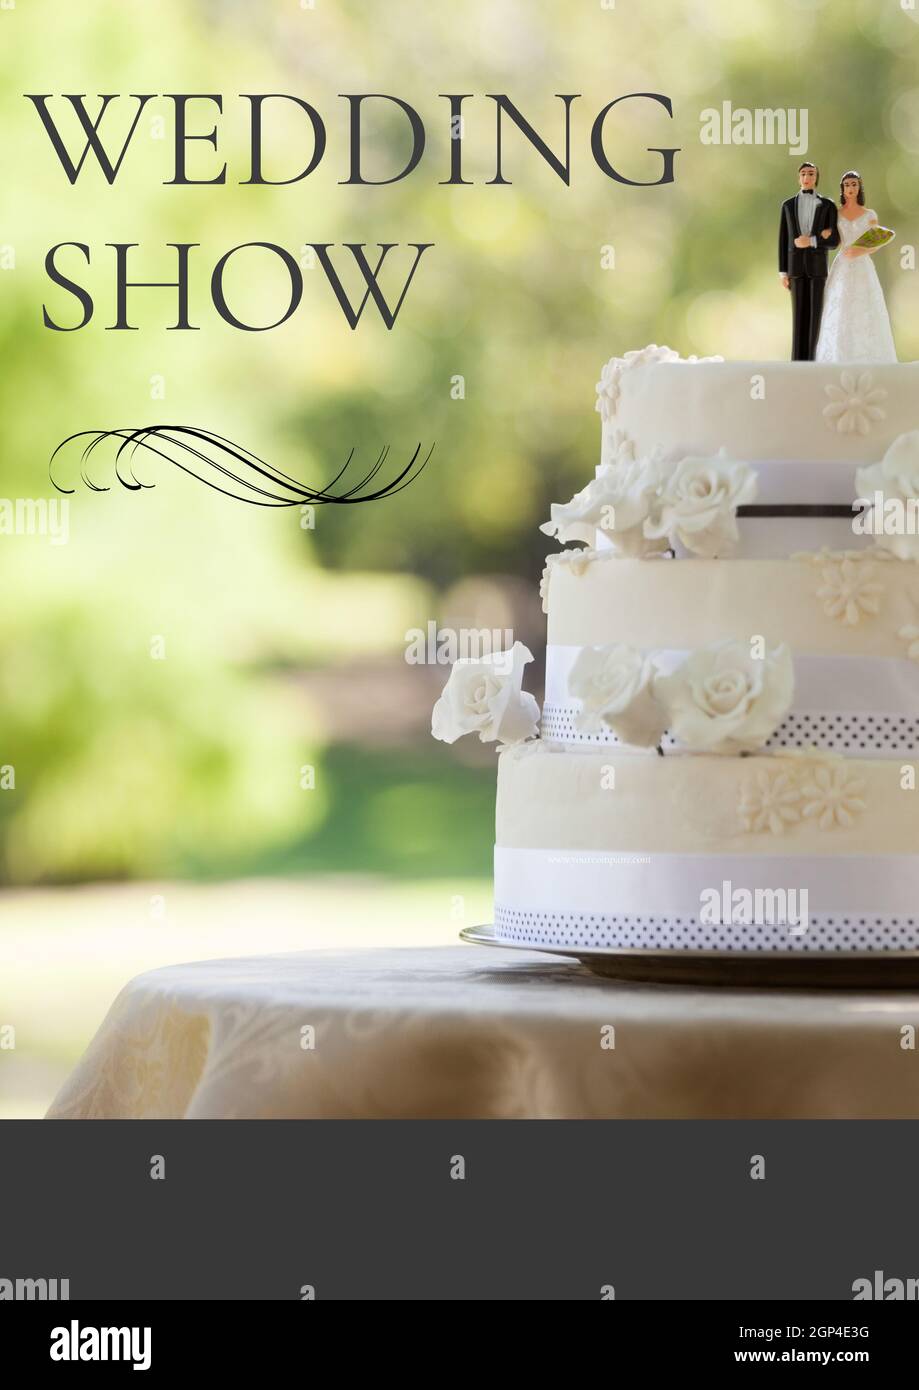 Composition of wedding show text over wedding cake Stock Photo